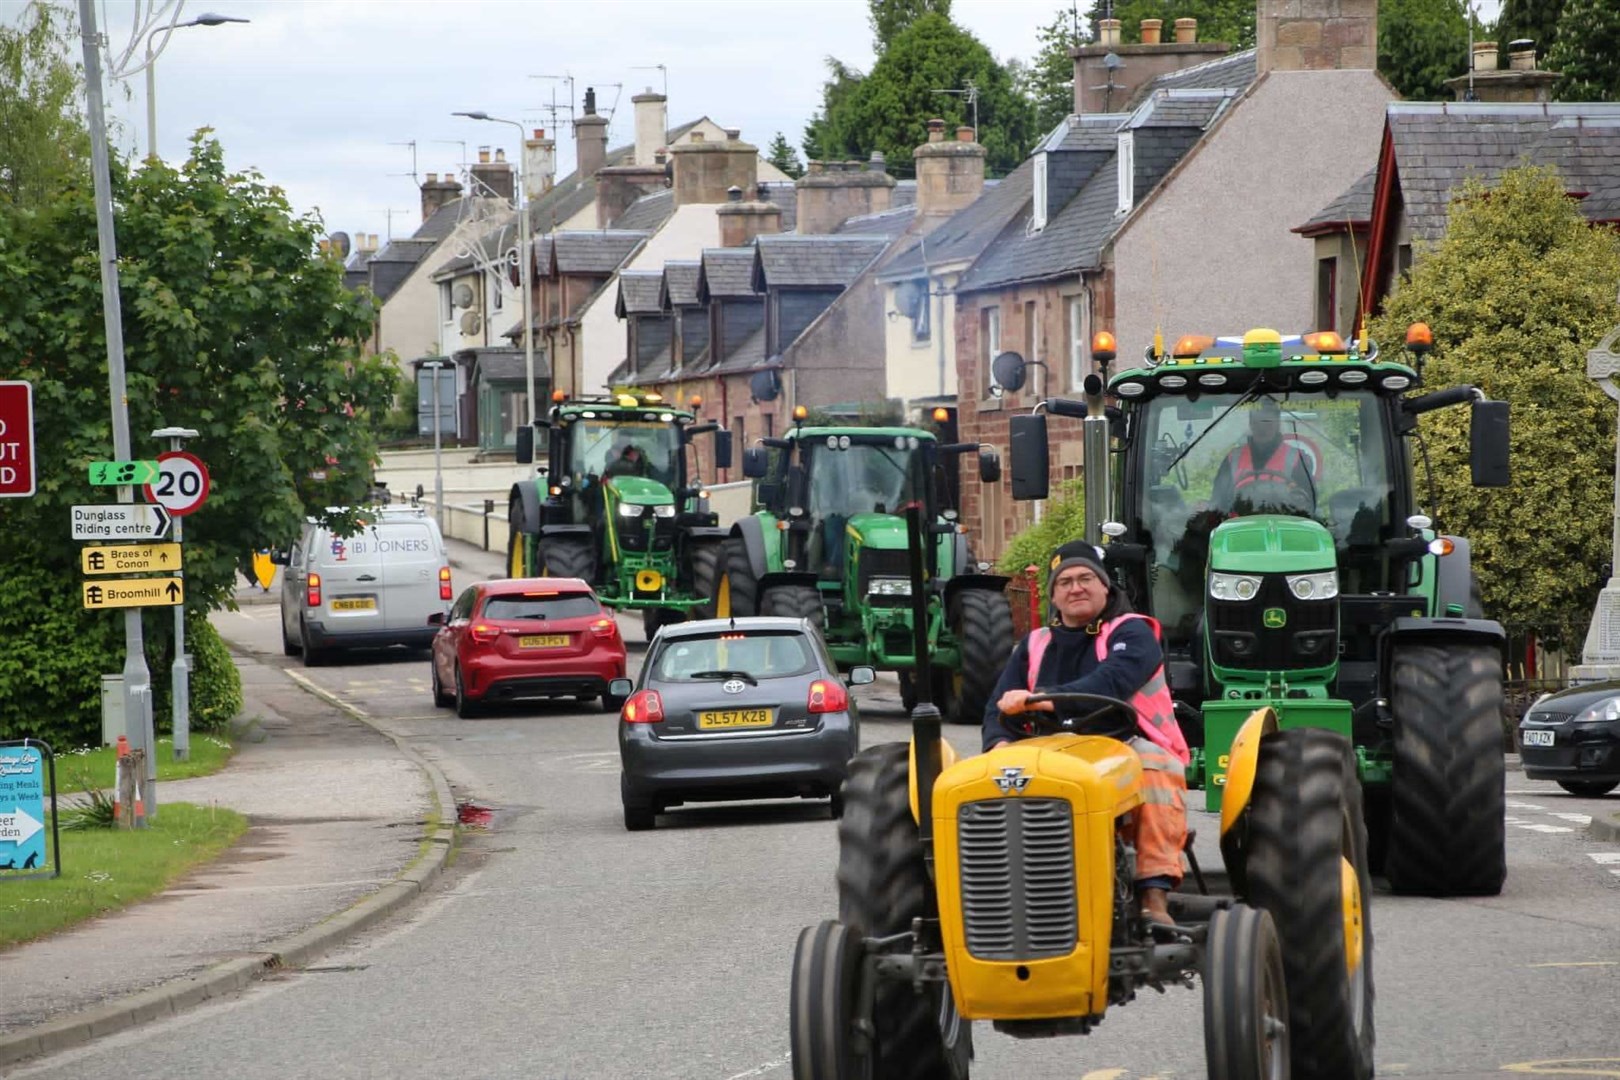 The evolution of tractors down the years clear for passers-by to see.